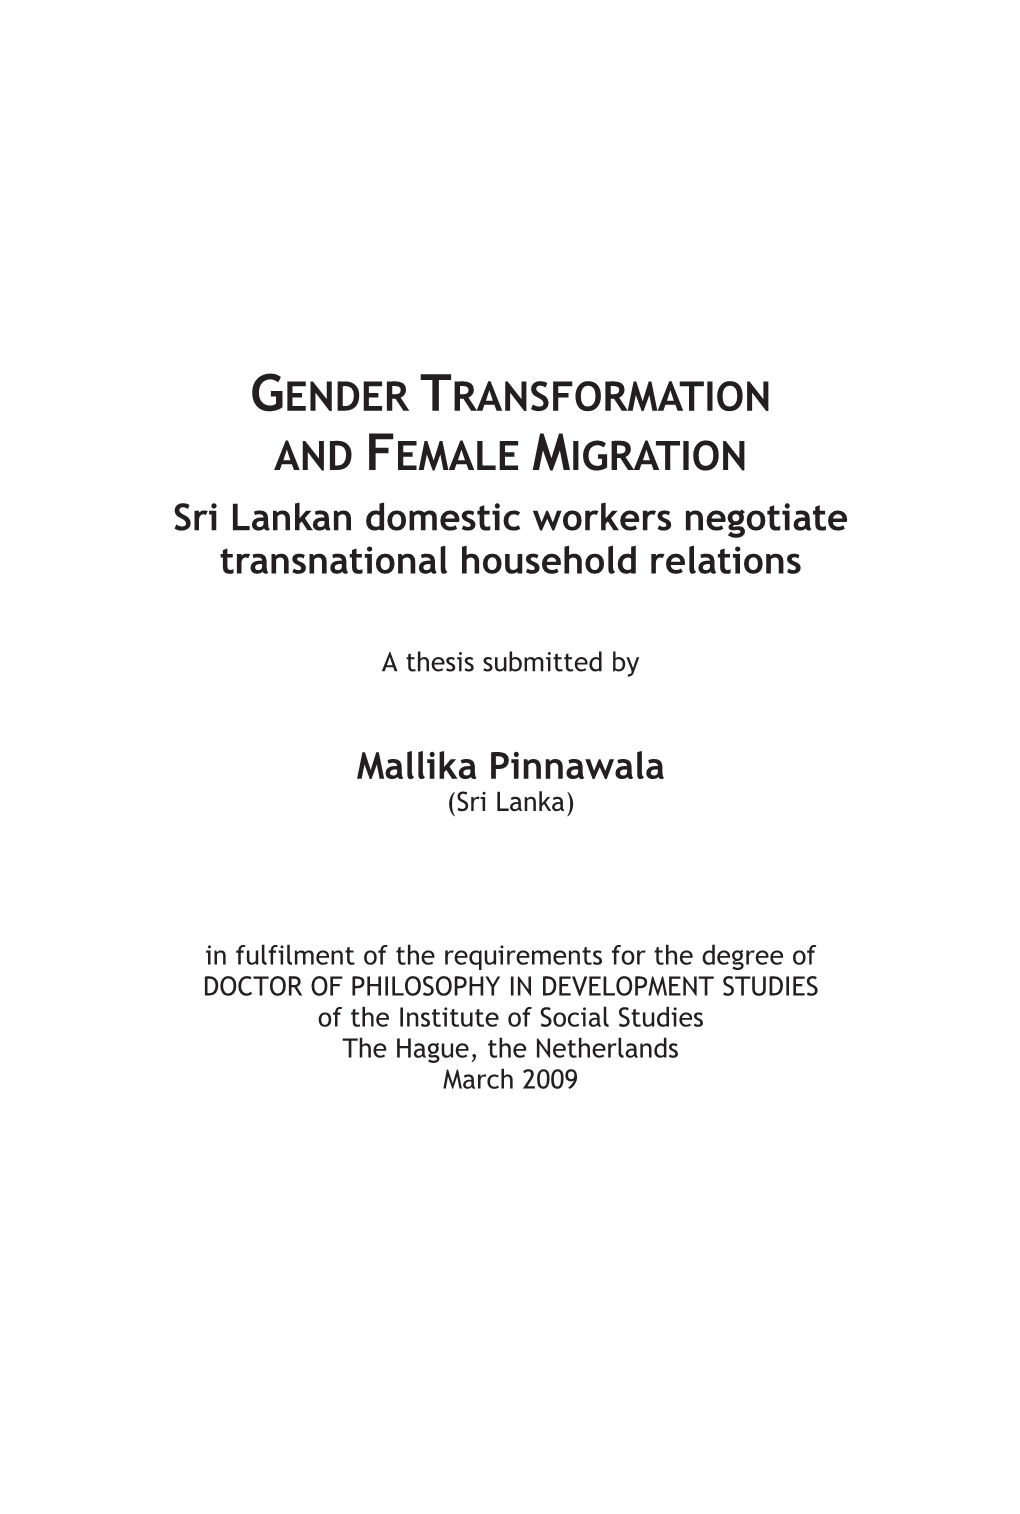 GENDER TRANSFORMATION and FEMALE MIGRATION Sri Lankan Domestic Workers Negotiate Transnational Household Relations